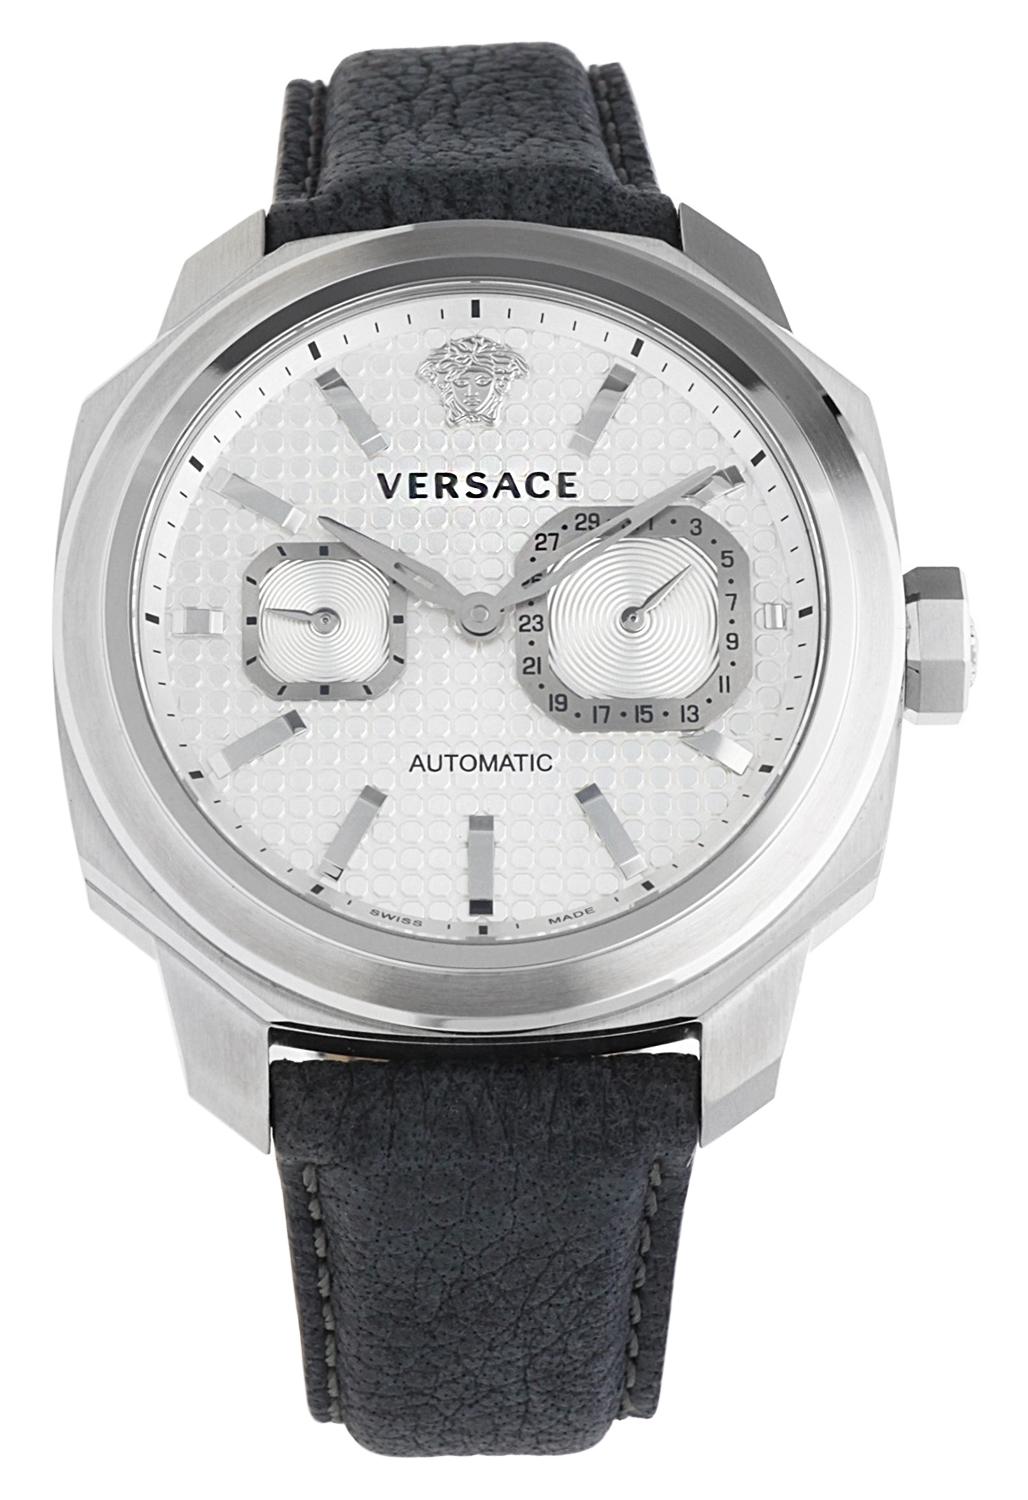 Item number: V14010016
Glass: Sapphire glass, Case Material: Stainless Steel, Bracelet material: Leather
Case color: silver, Dial Color: silver, Band color: anthracite
Clasp: deployment clasp, Water resistant in Bar: 5
Case Dimensions: length: 4,9